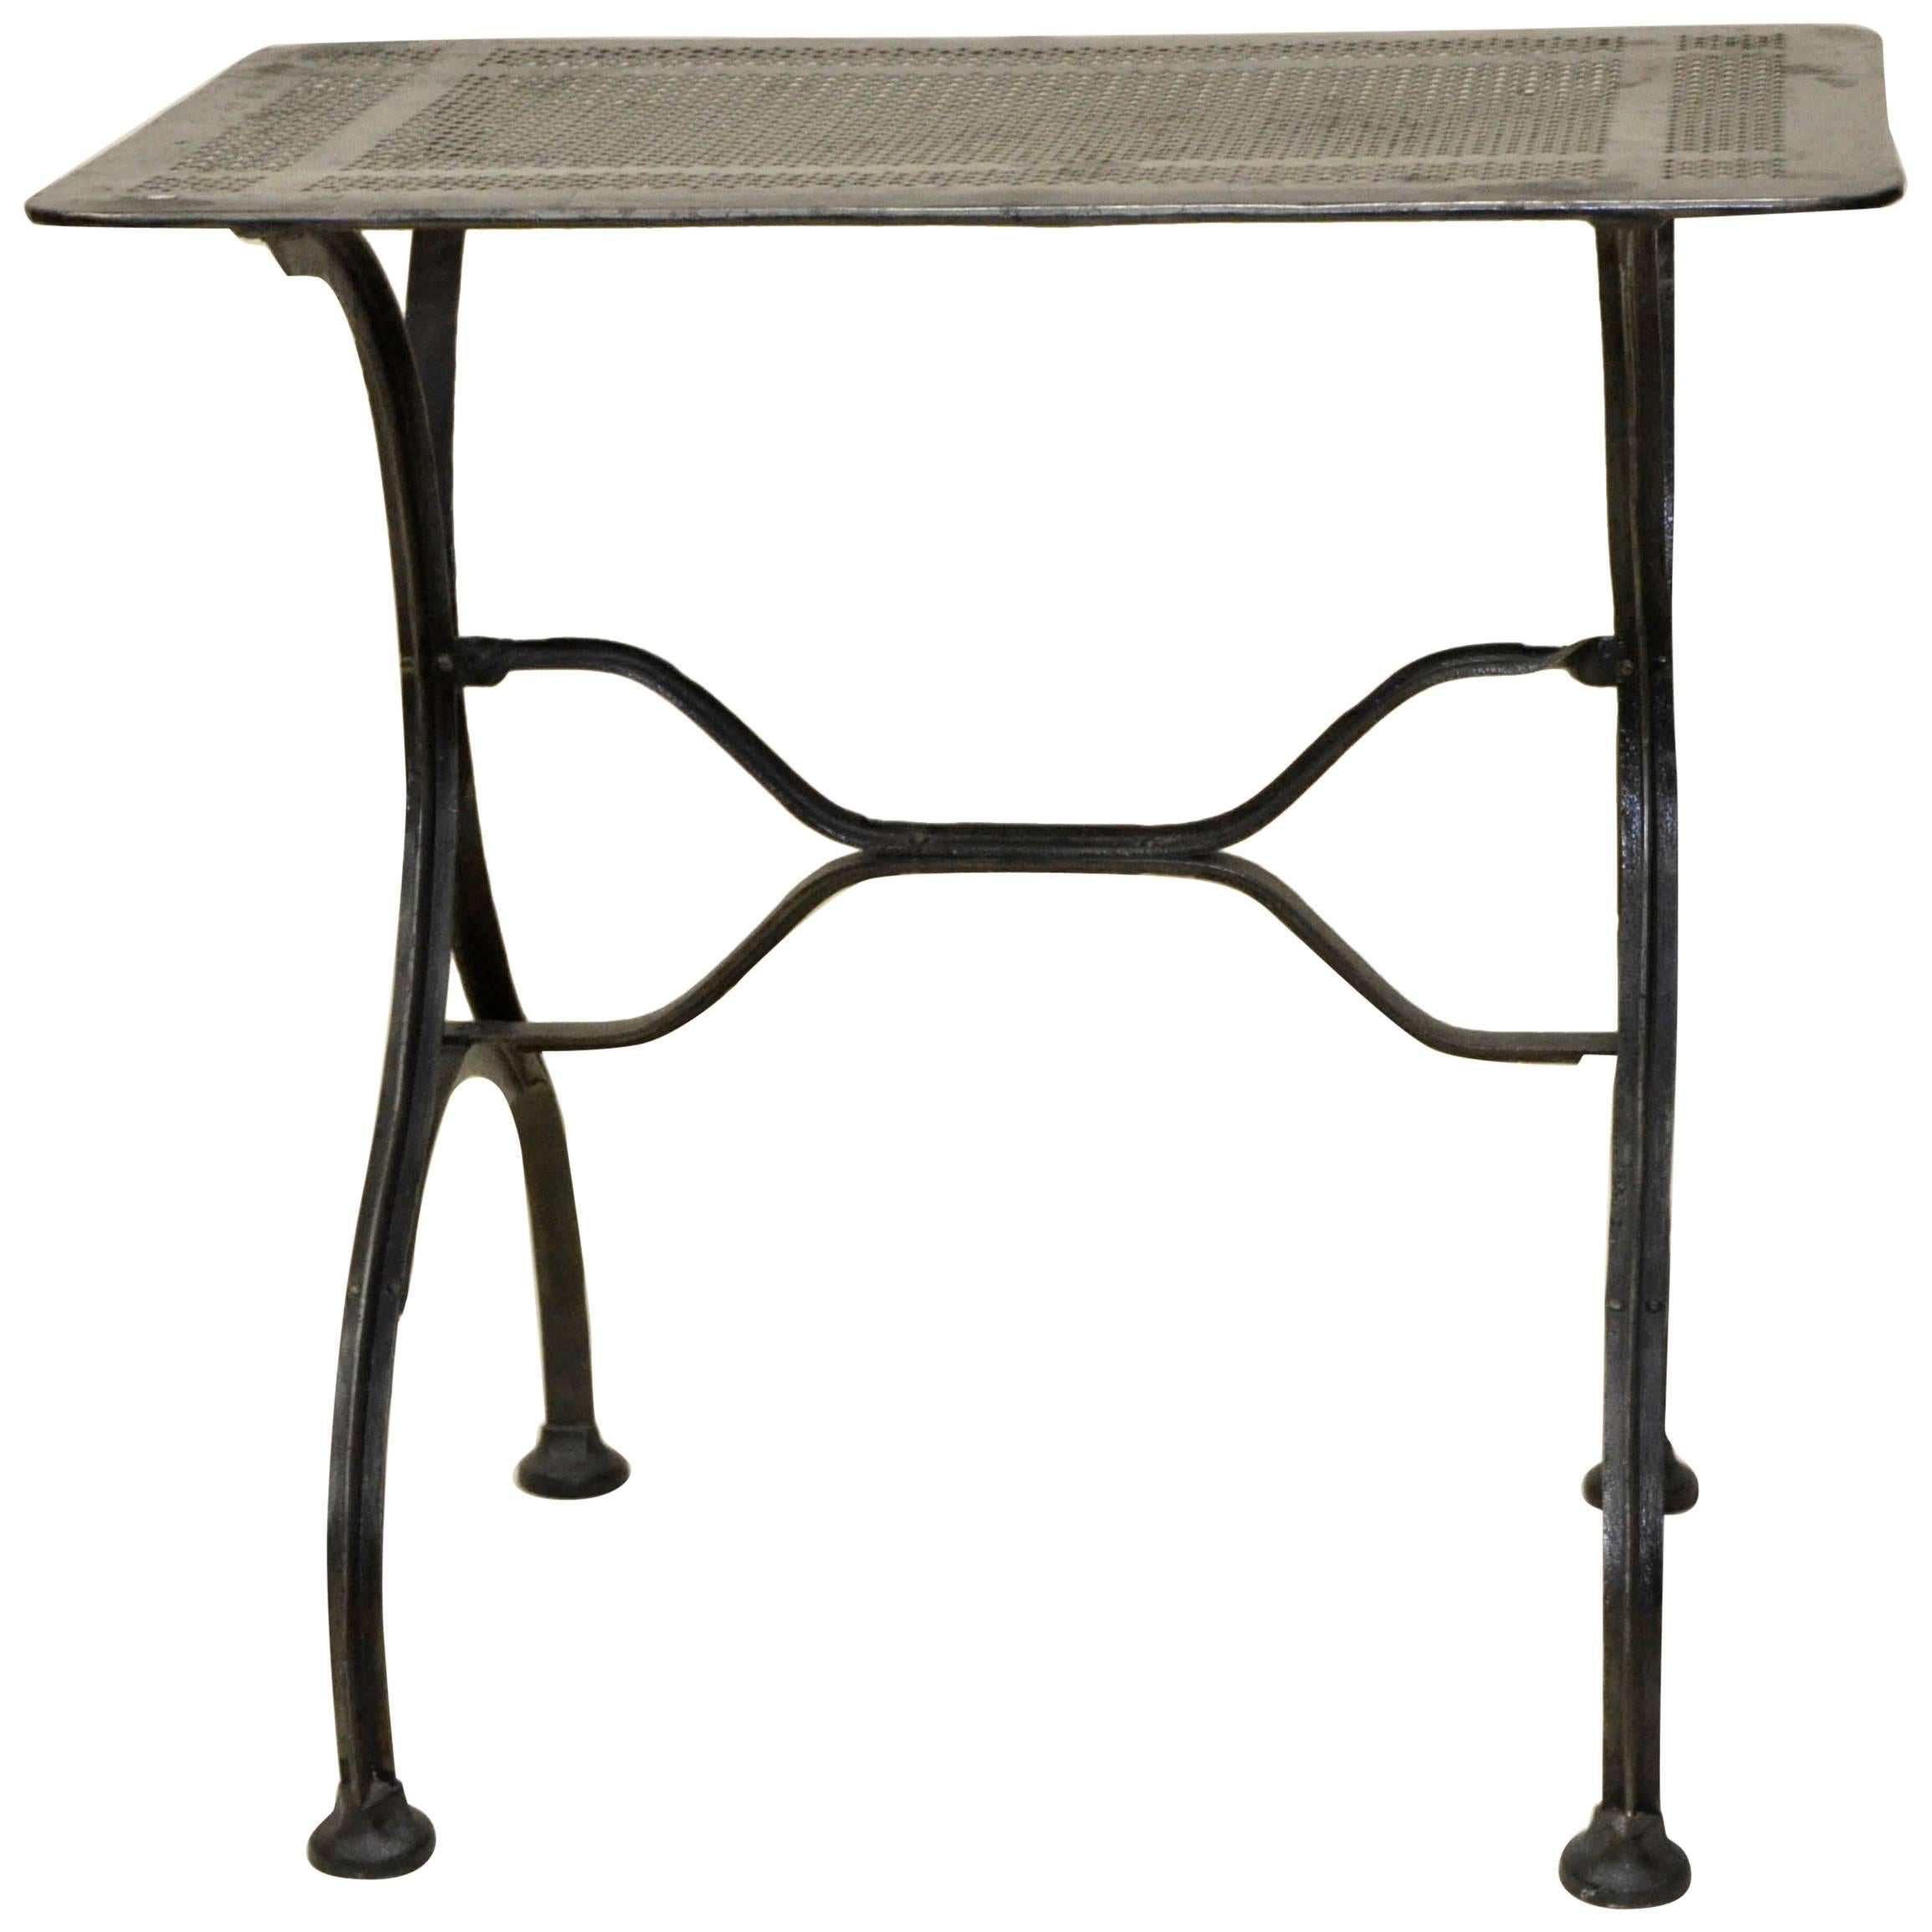 1930s Vintage Italian Stripped Metal Garden Table For Sale